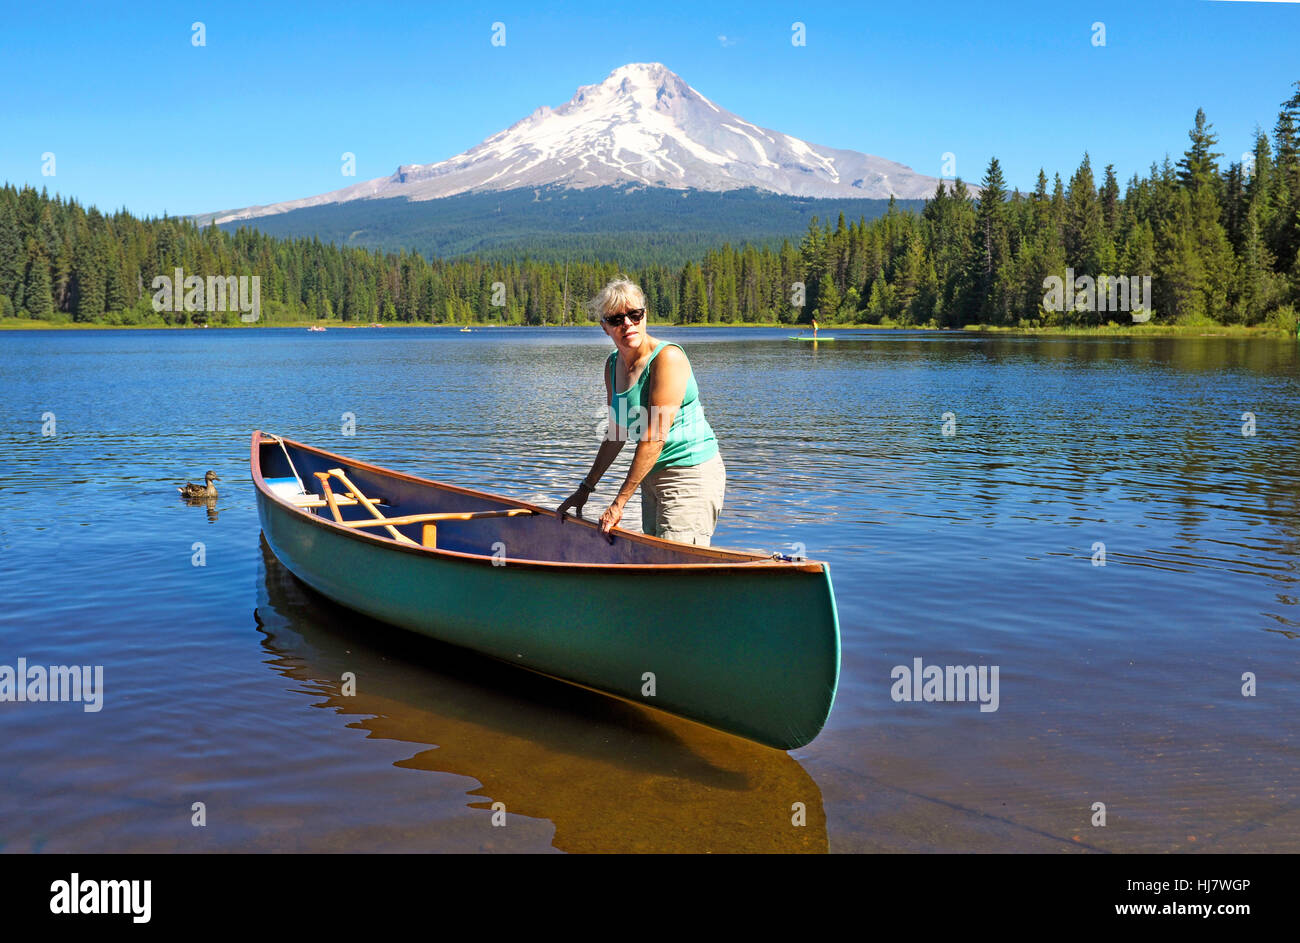 August 10, 2016; Intended for Unreleased Travel’ . Canoeing on Trillium lake, near Mount Hood, highest peak in Oregon. In the Mount Hood National Fore Stock Photo